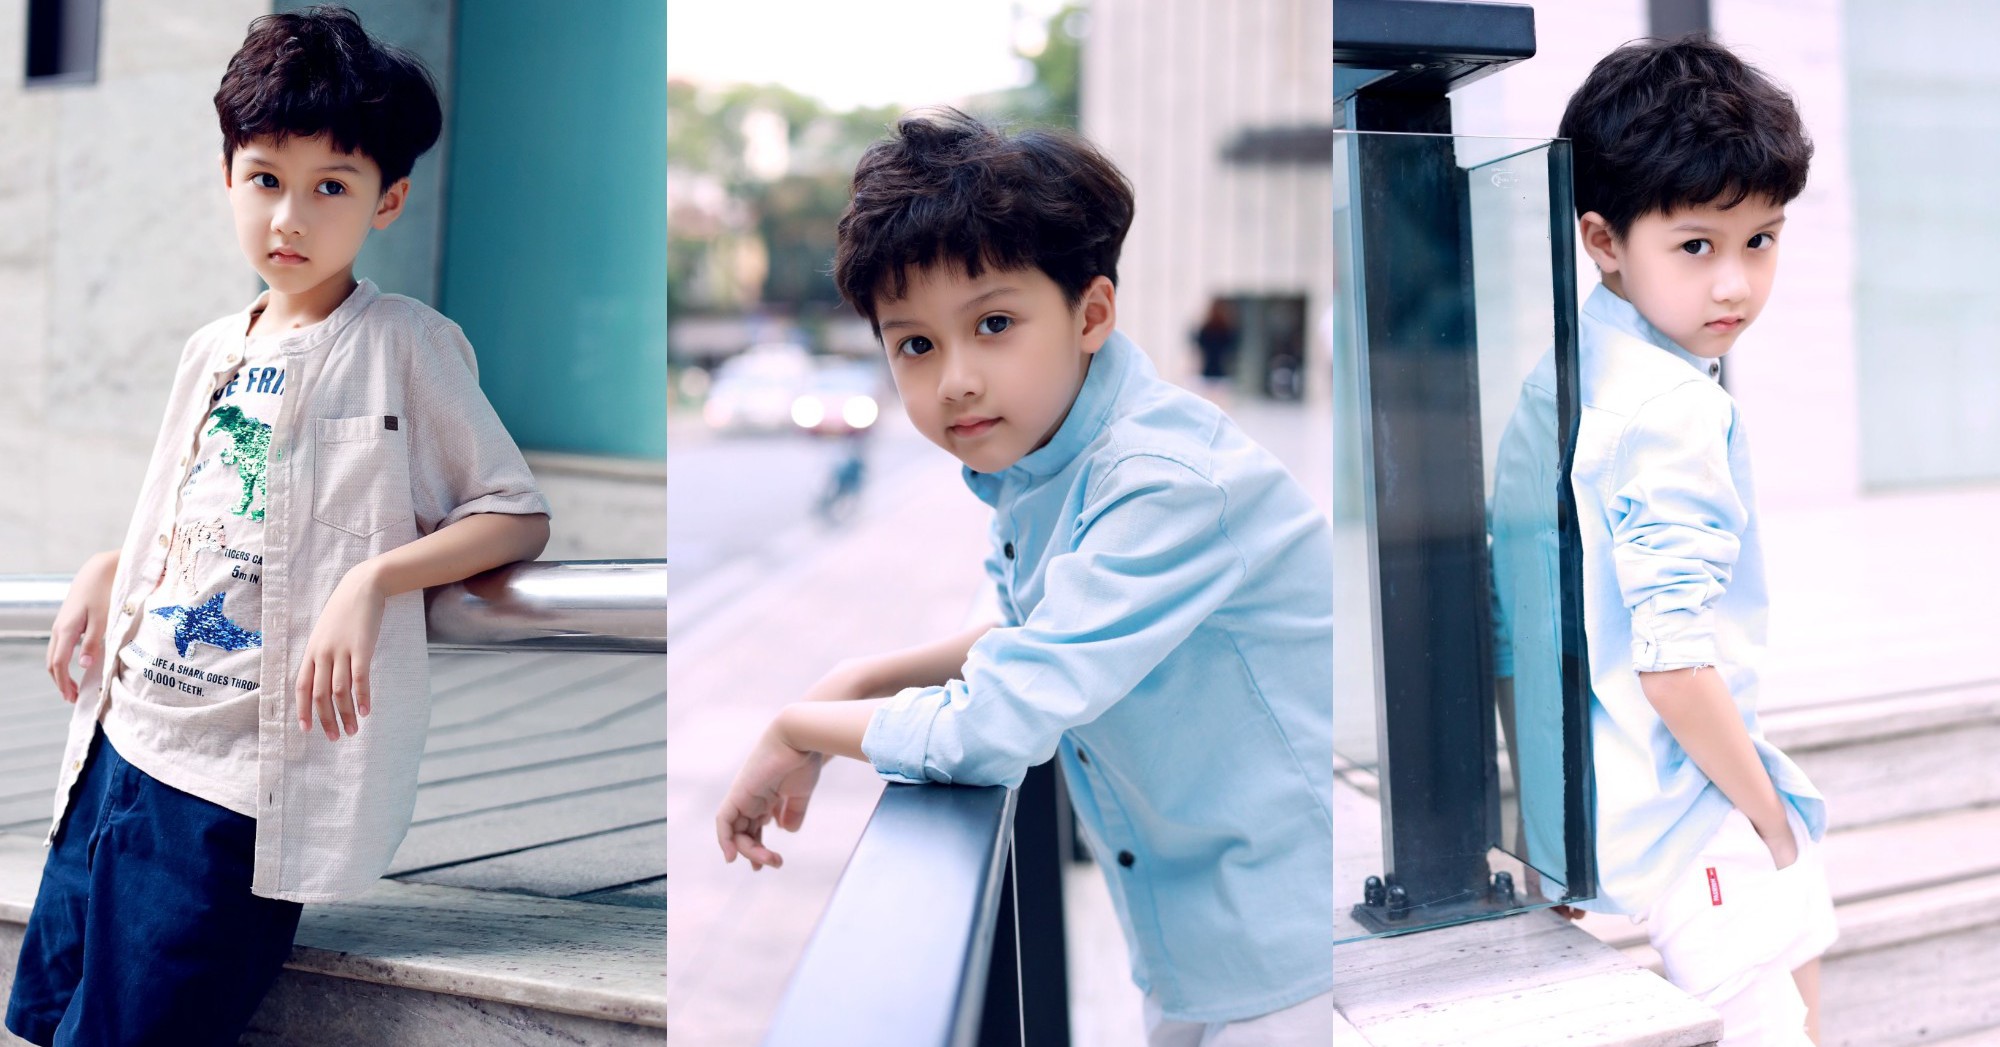 Melted because of the handsomeness and coolness of Huyen Lizzie’s son